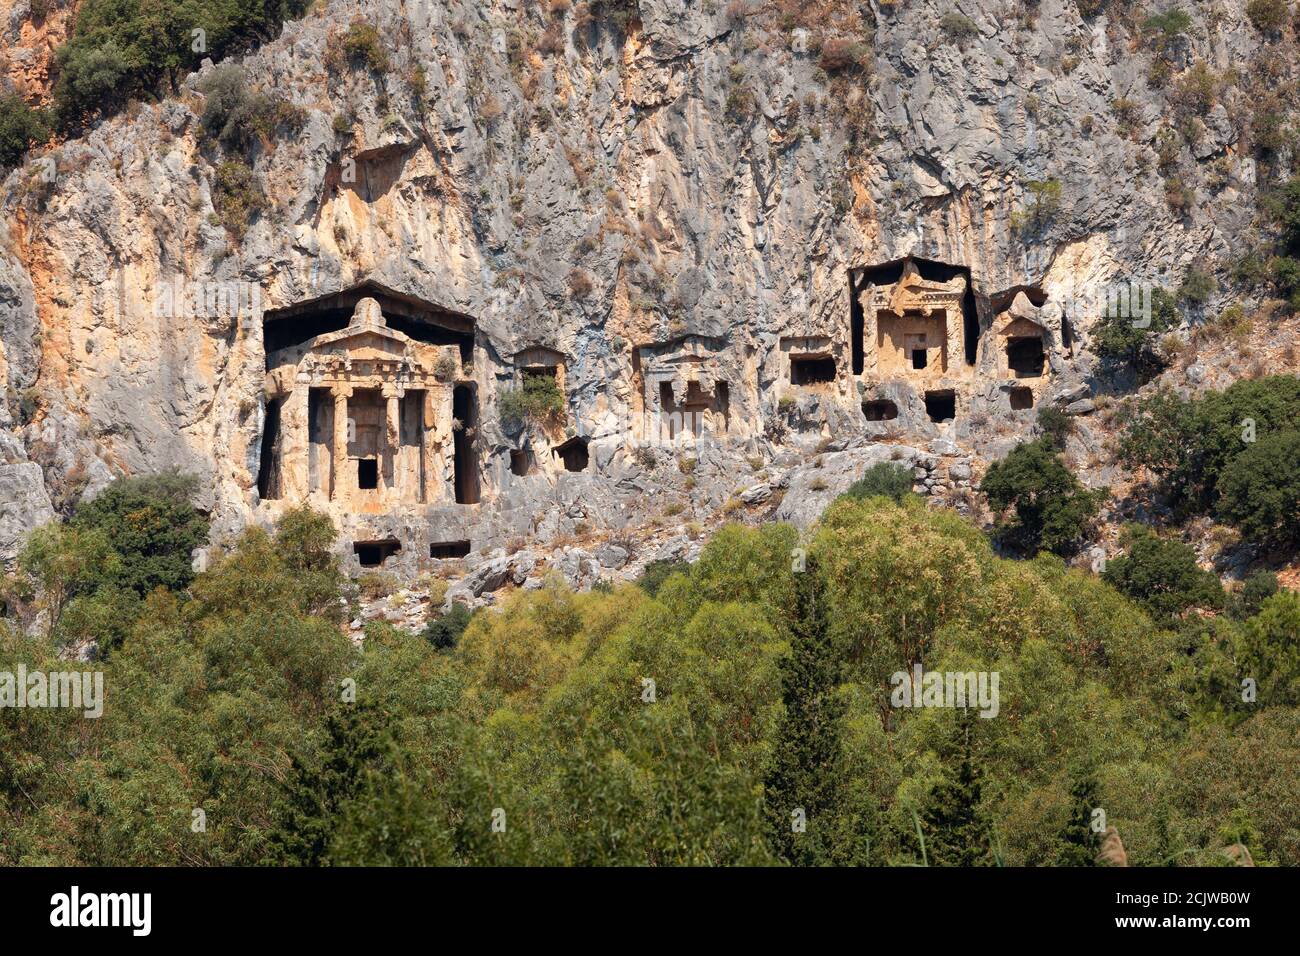 Lycian Royal mountain tombs carved into the rocks near the town of Dalyan in the province of Marmaris in Turkey Stock Photo